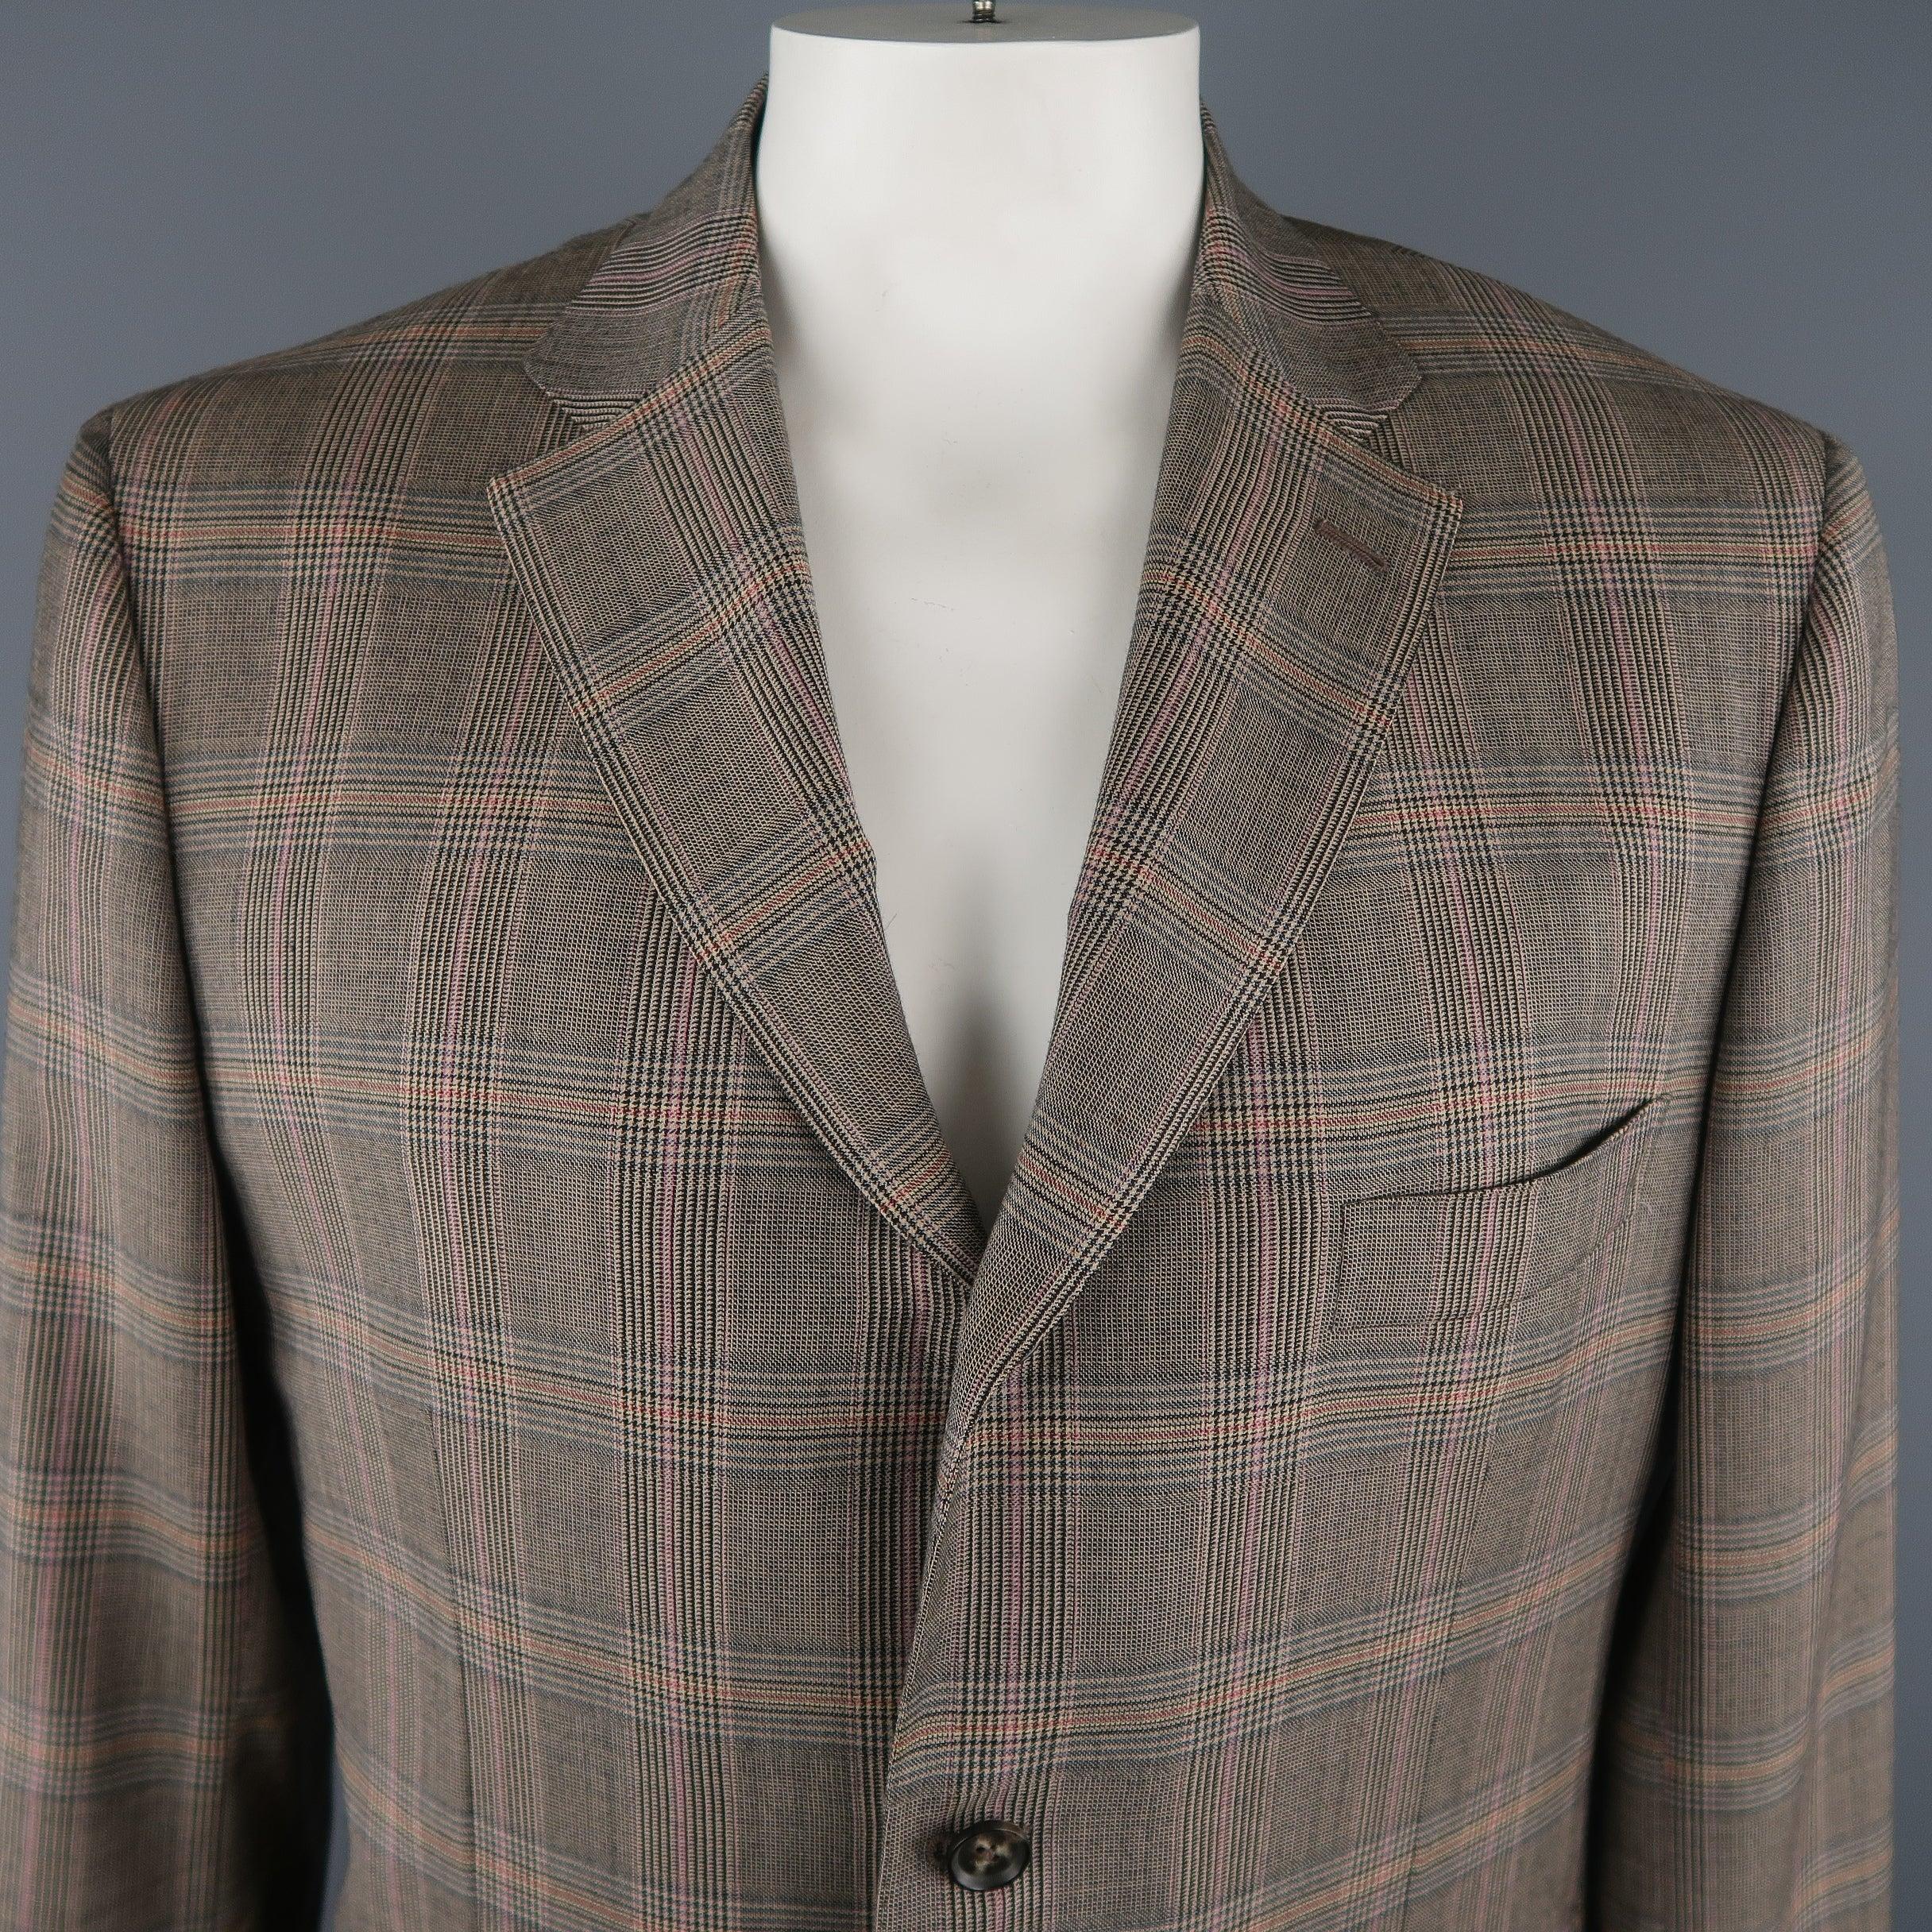 ISAIA 
long blazer comes in brown tones in a plaid wool material, featuring a notch lapel, slit and flap pockets, 3 buttons closure, functional cuff buttons, single breasted. Light spot at front. Made in Italy. Good Pre-Owned Condition. 

Marked:  